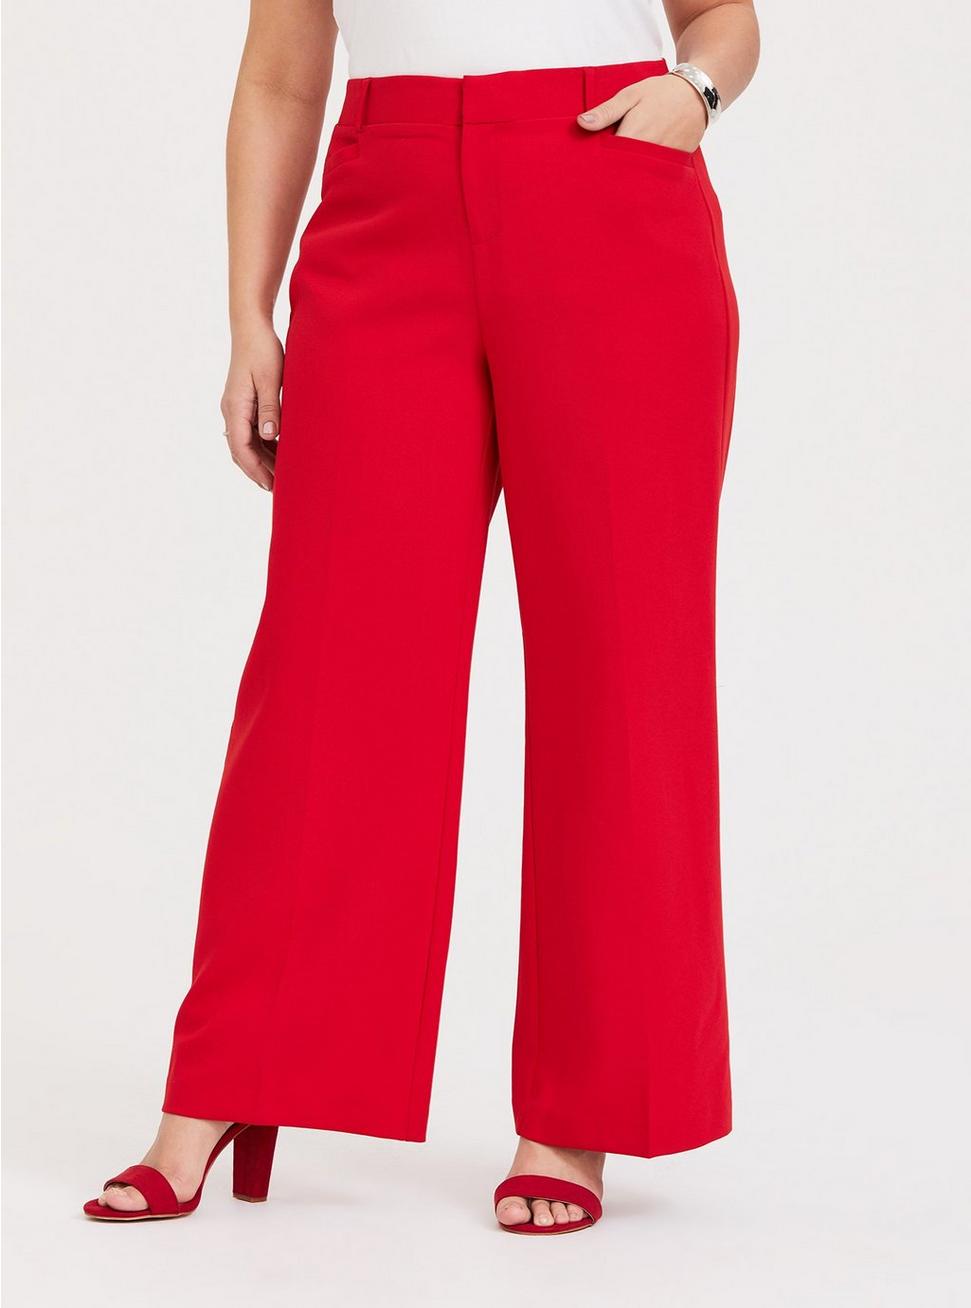 Plus Size   Red Structured Woven Wide Leg Pant   Torrid